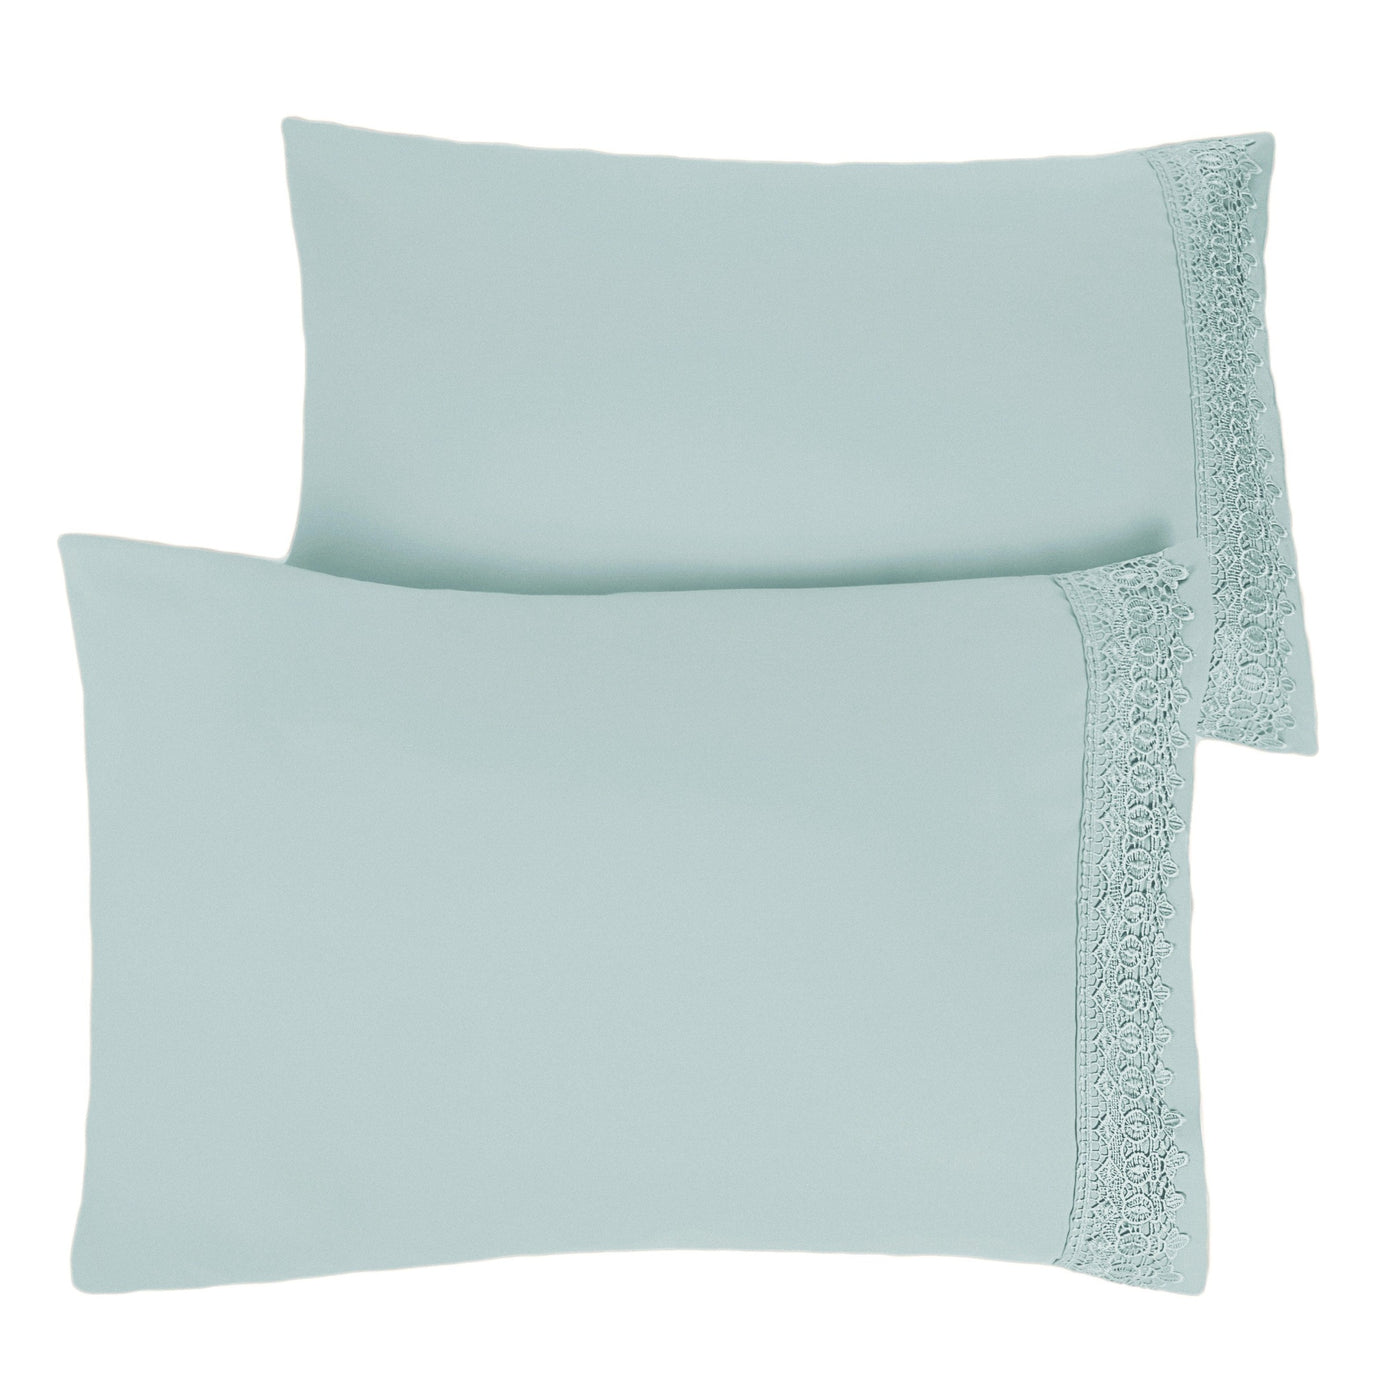 Two Vilano Lace Hem Pillow Cases in Sky Blue Stack Together#color_vilano-sky-blue